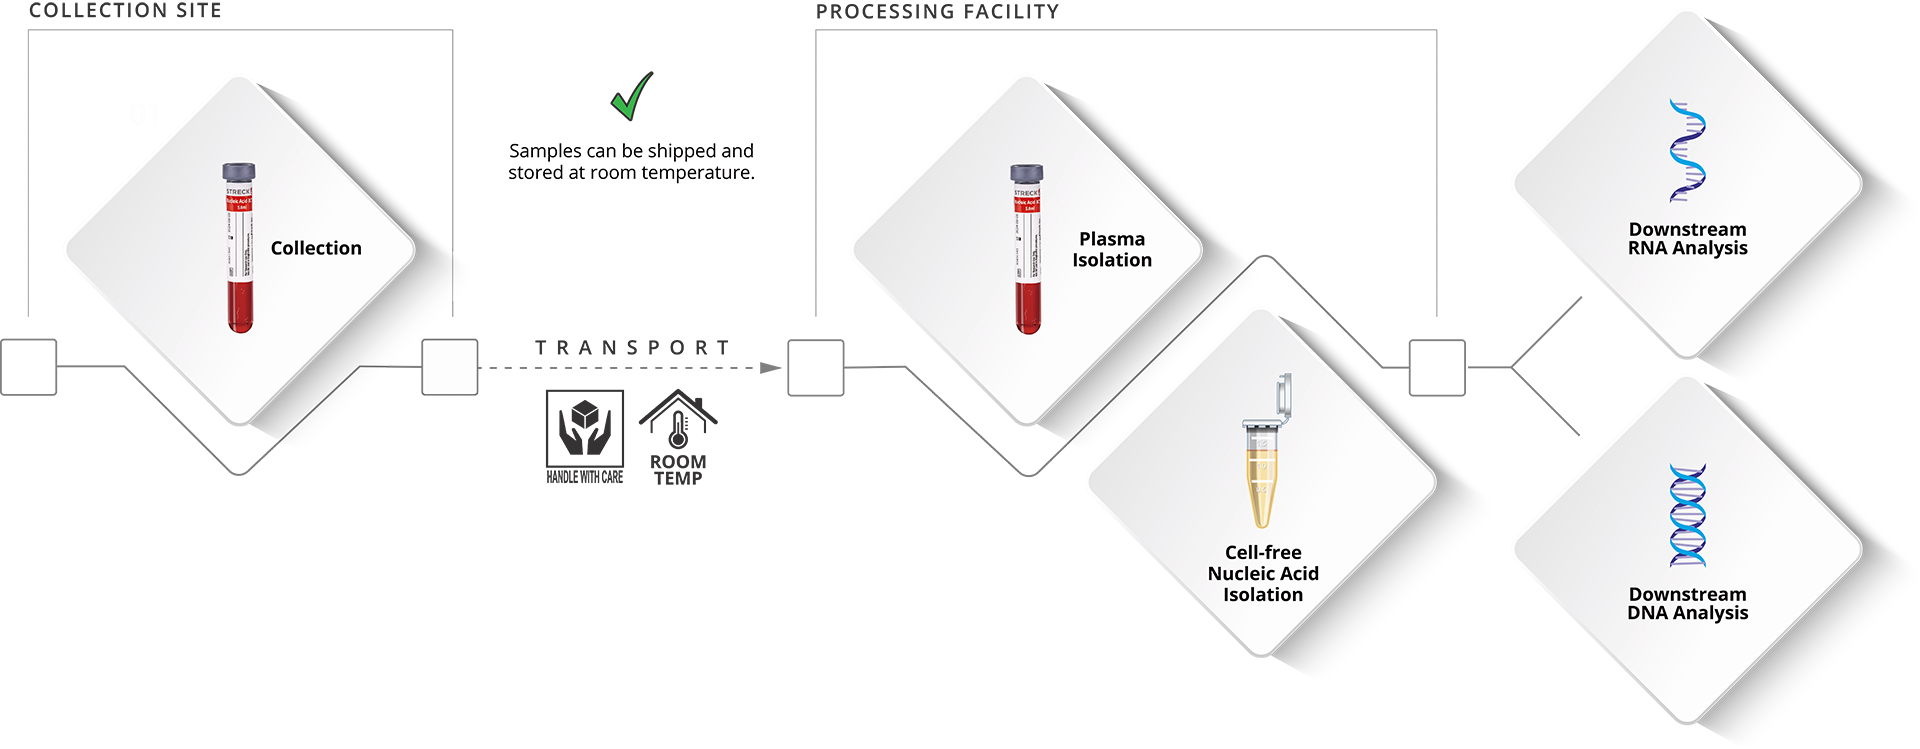 Nucleic Acid BCT Preanalytical workflows